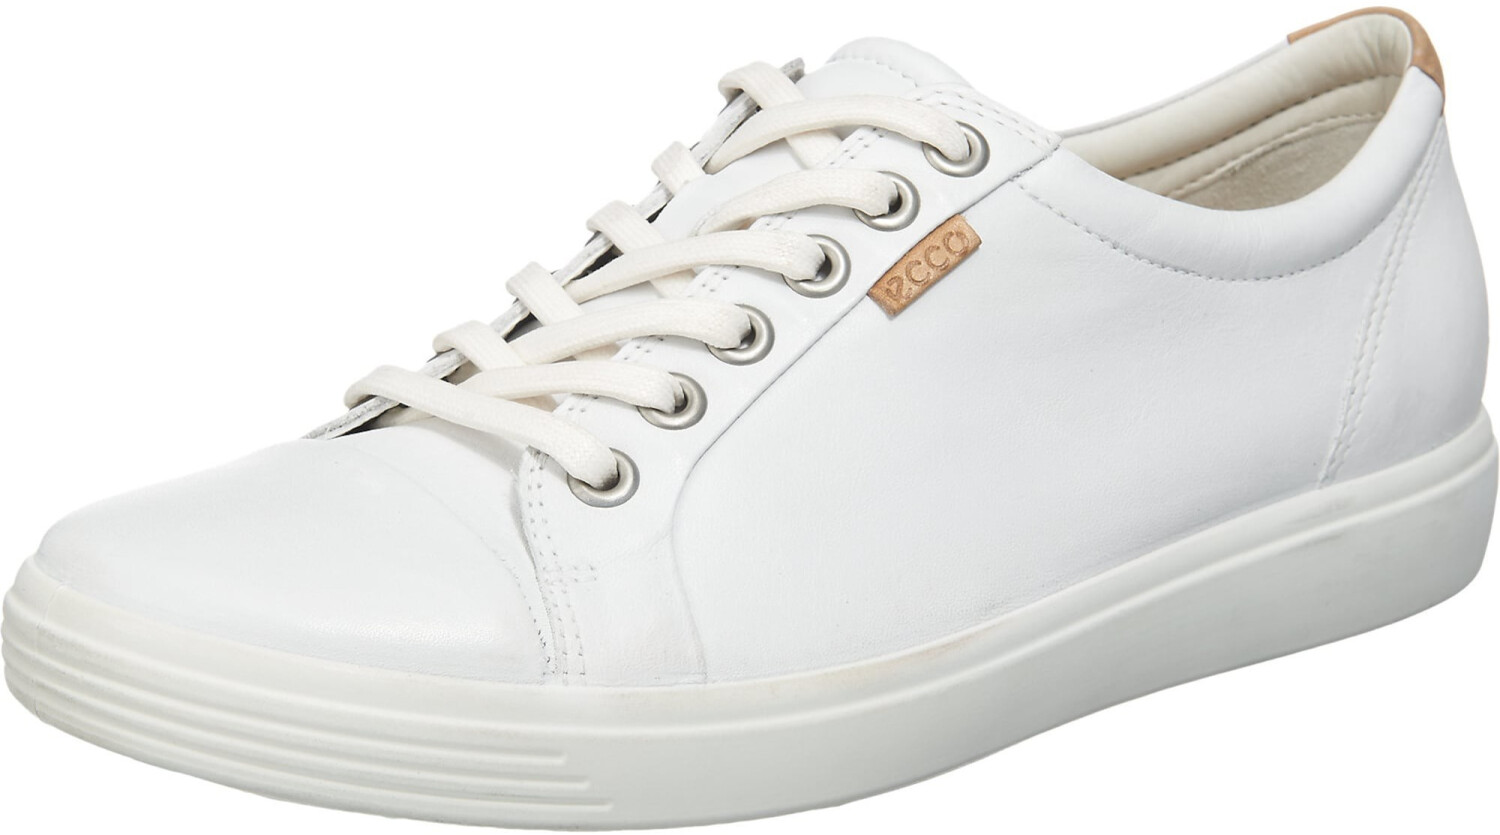 Buy Ecco Soft 7 Women white from £96.66 (Today) – Best Deals on idealo ...